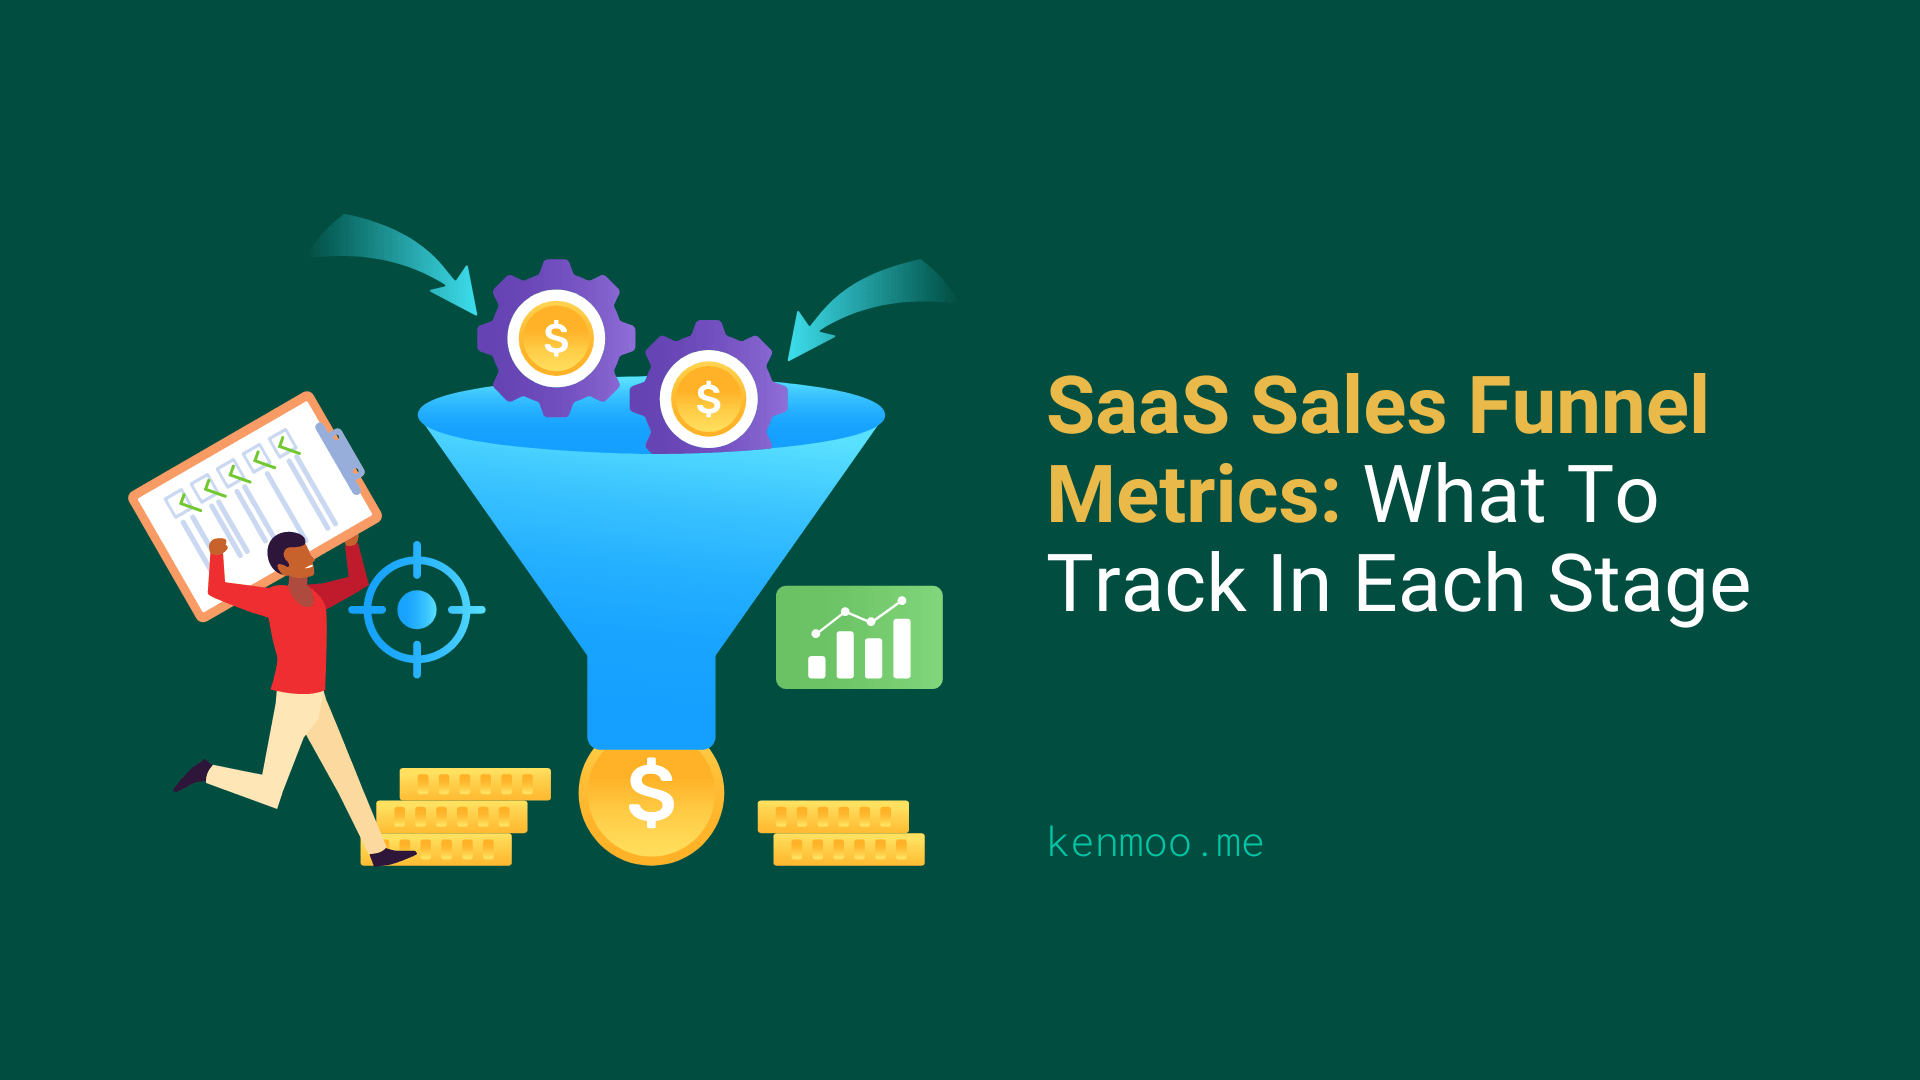 SaaS Sales Funnel Metrics: What To Track In Each Stage